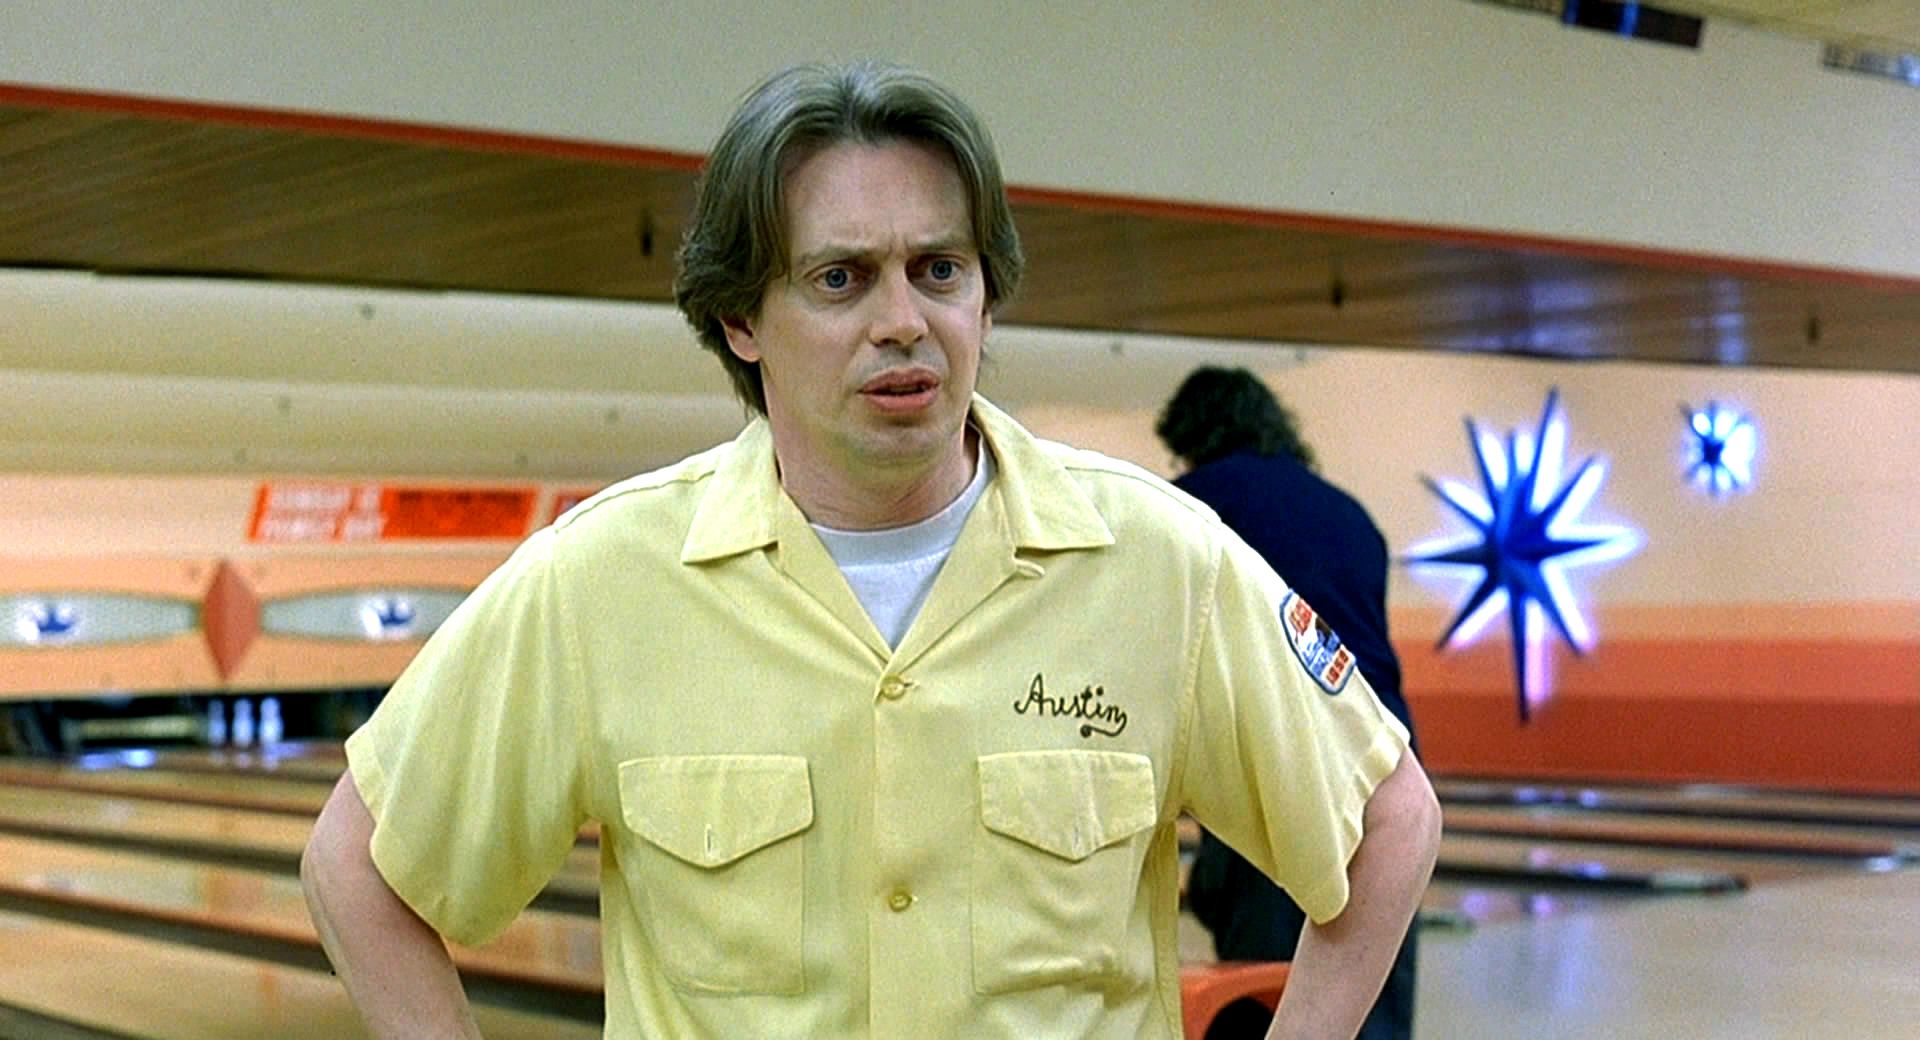 Though Donny wears several personalised bowling shirts during the film, none of them bear his name.